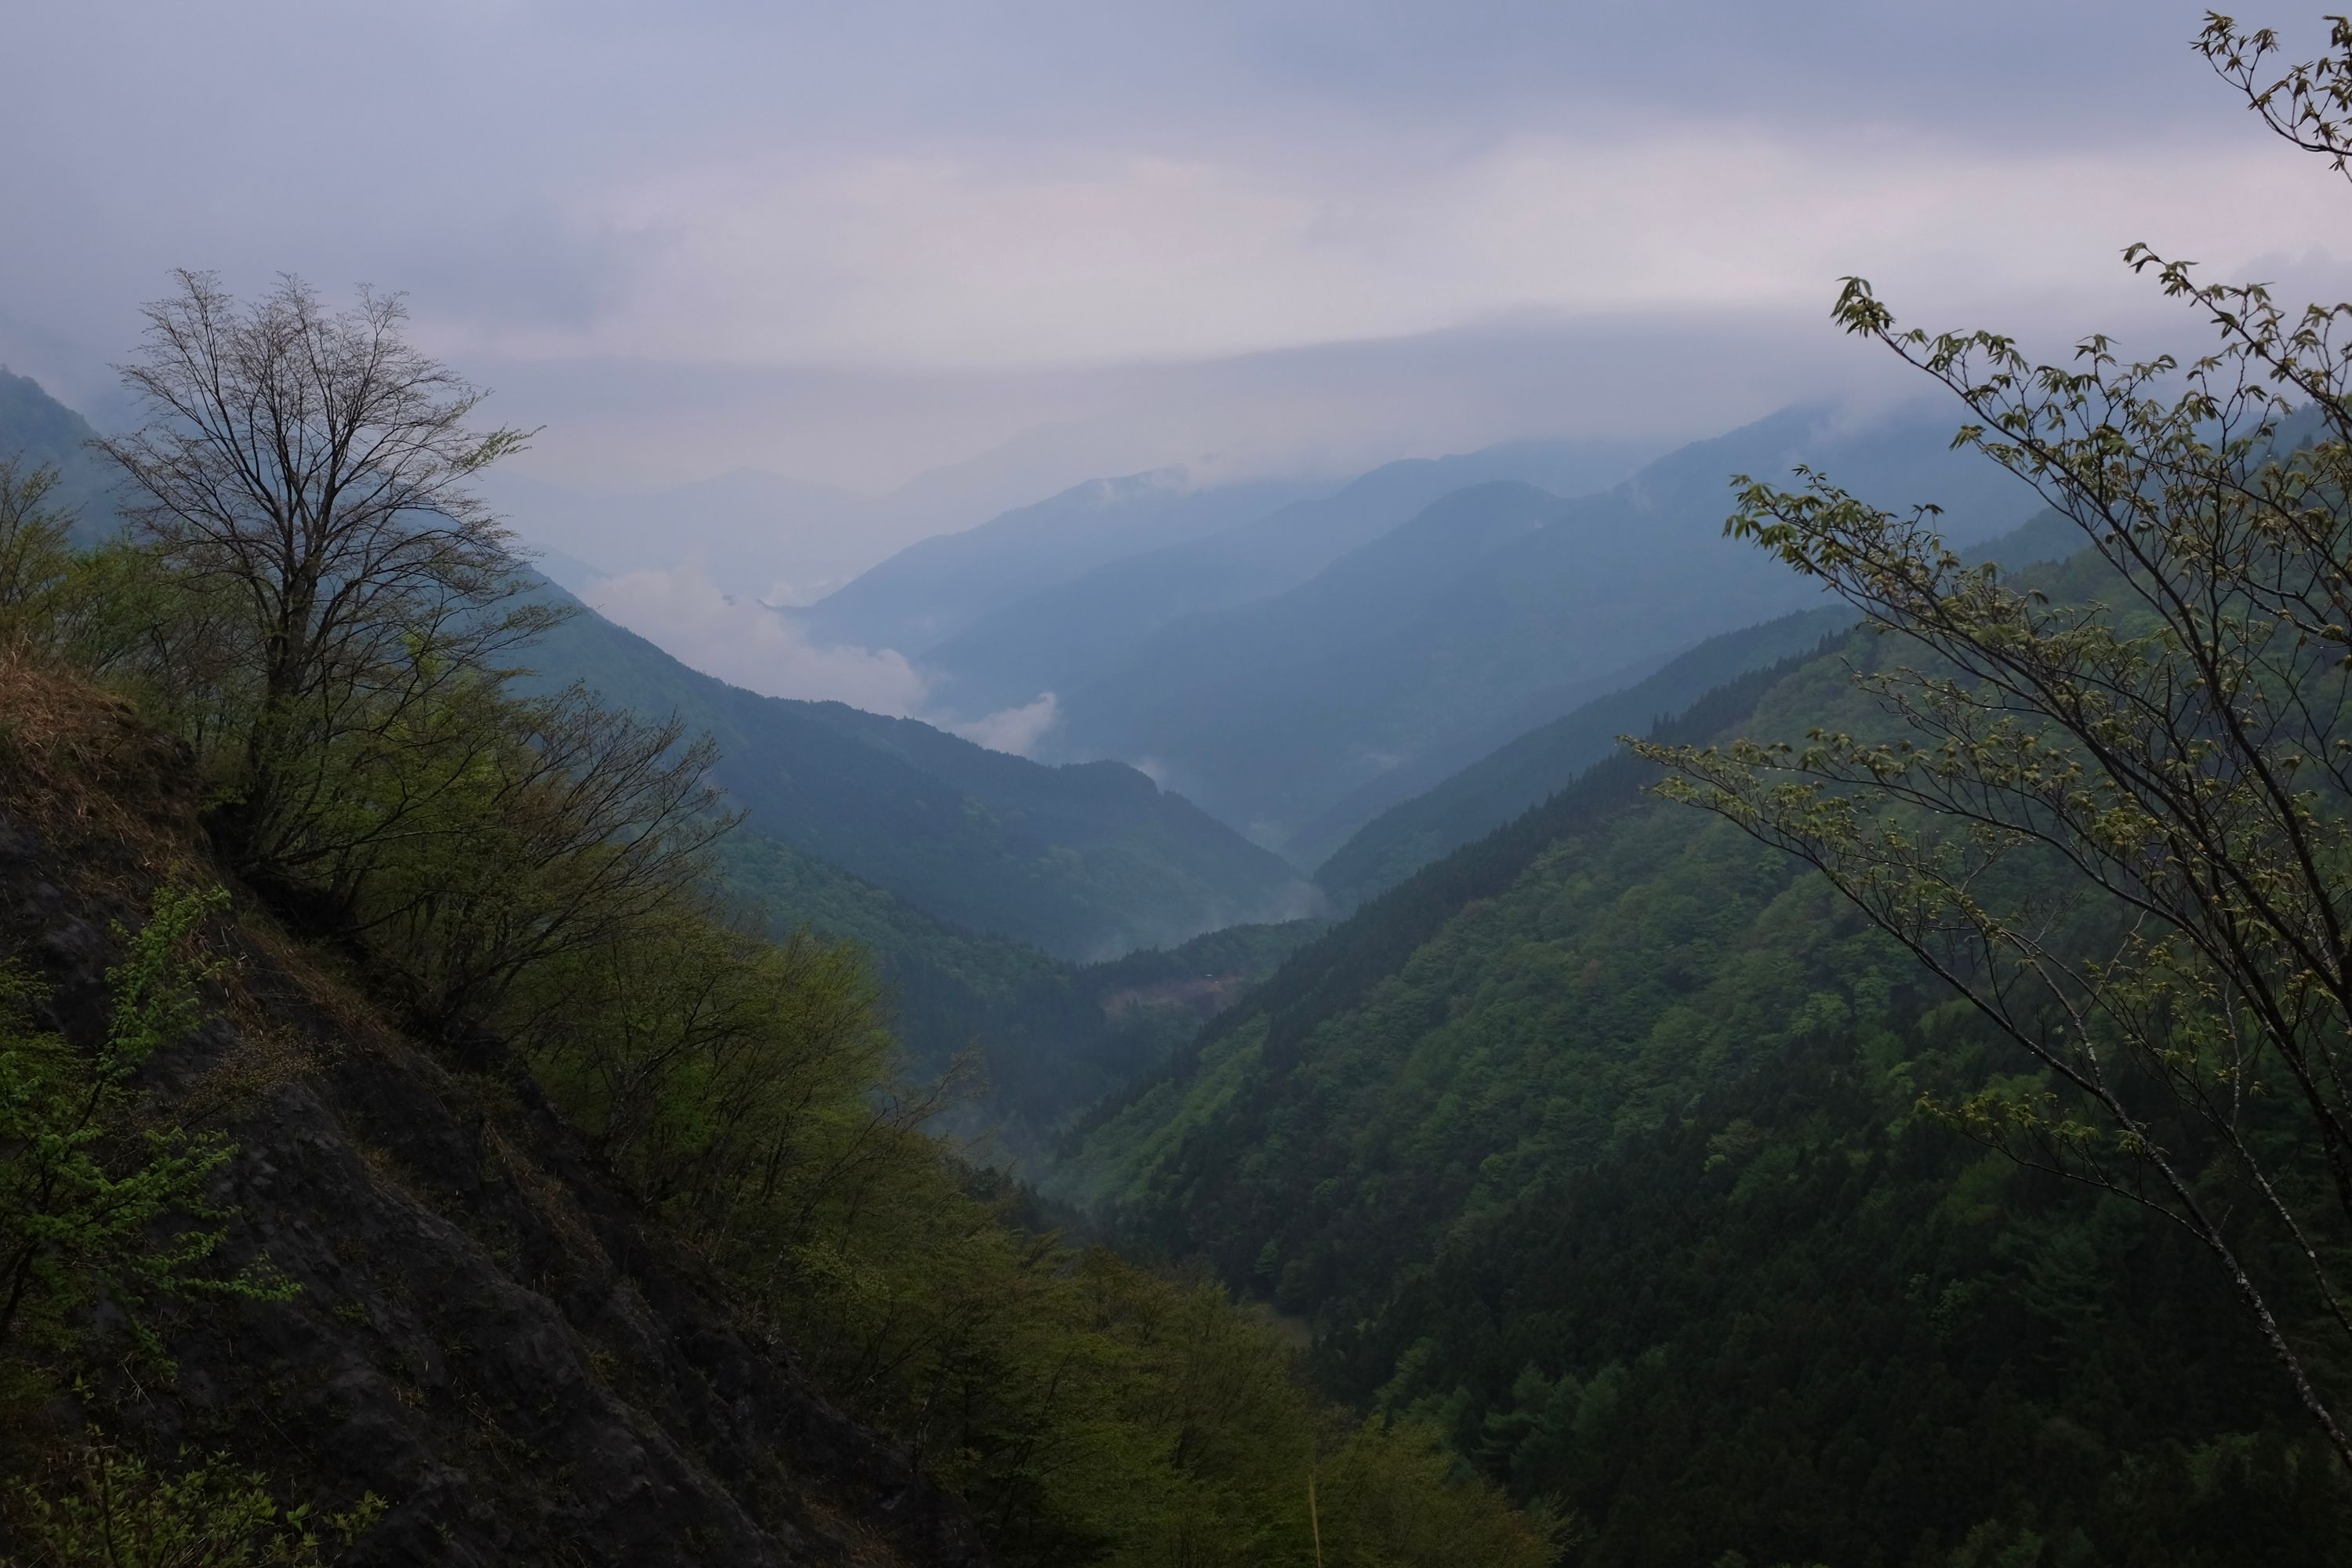 A cloud-filled, forested valley runs towards the horizon under very cloudy skies.